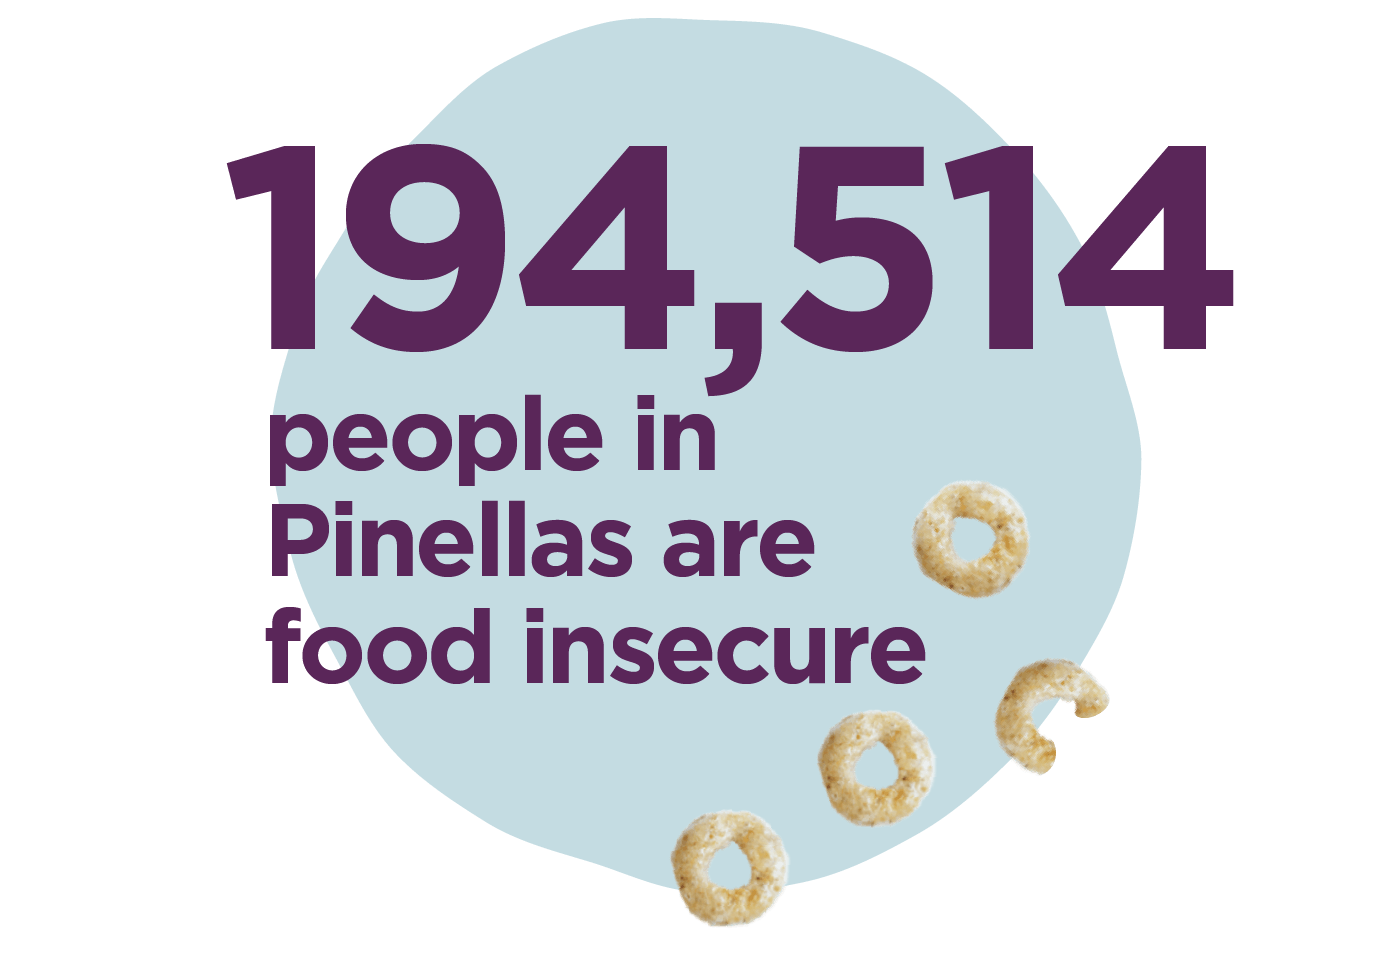 Graphic stating 194,514 people in Pinellas are food insecure